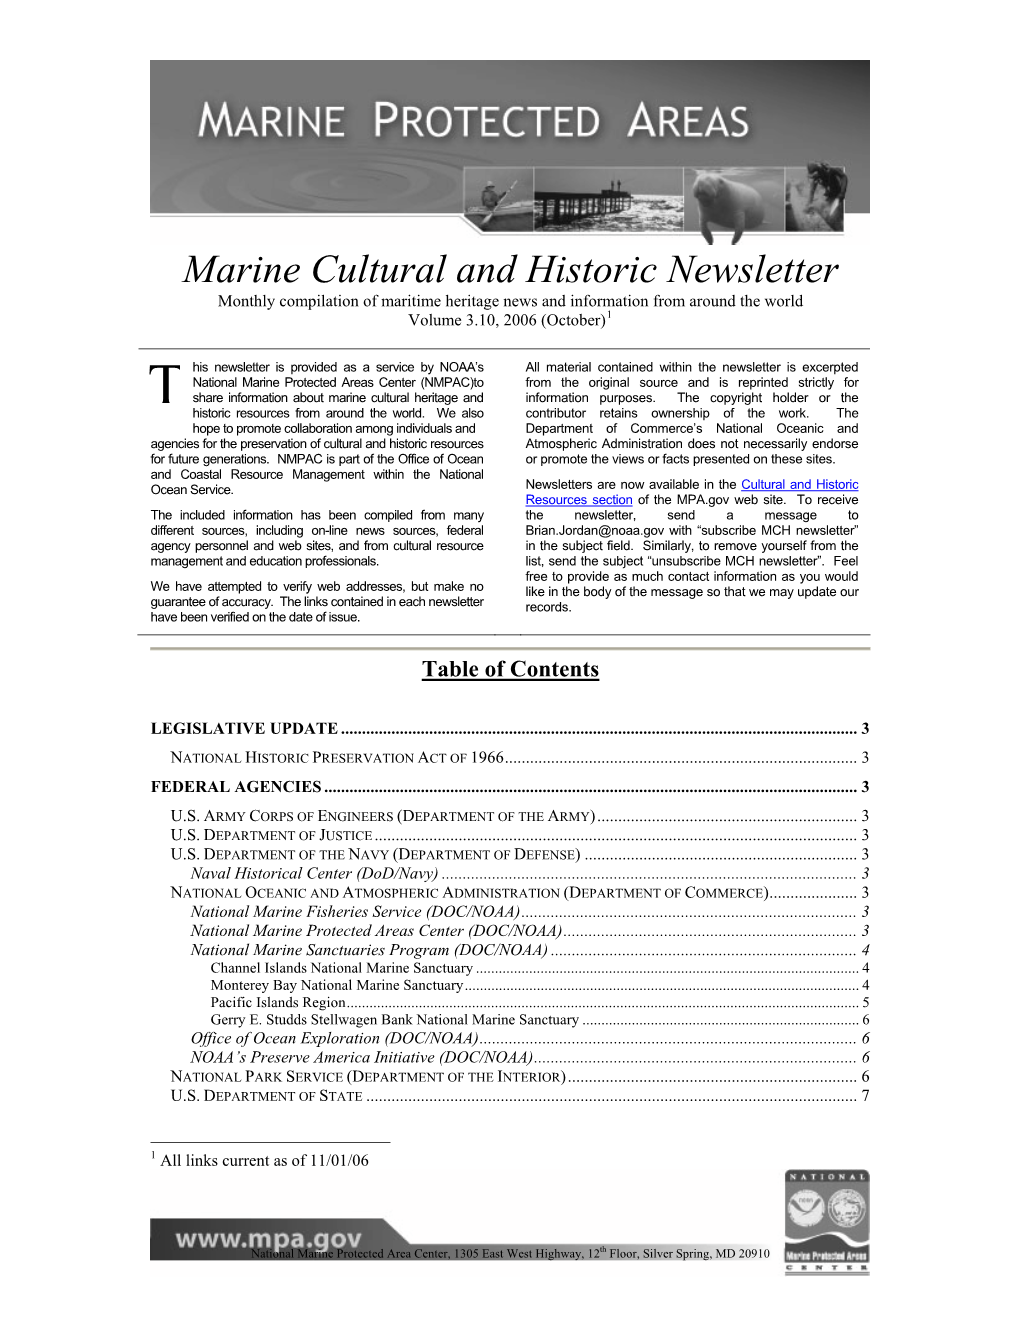 Marine Cultural and Historic Newsletter Vol 3(10): October, 2006